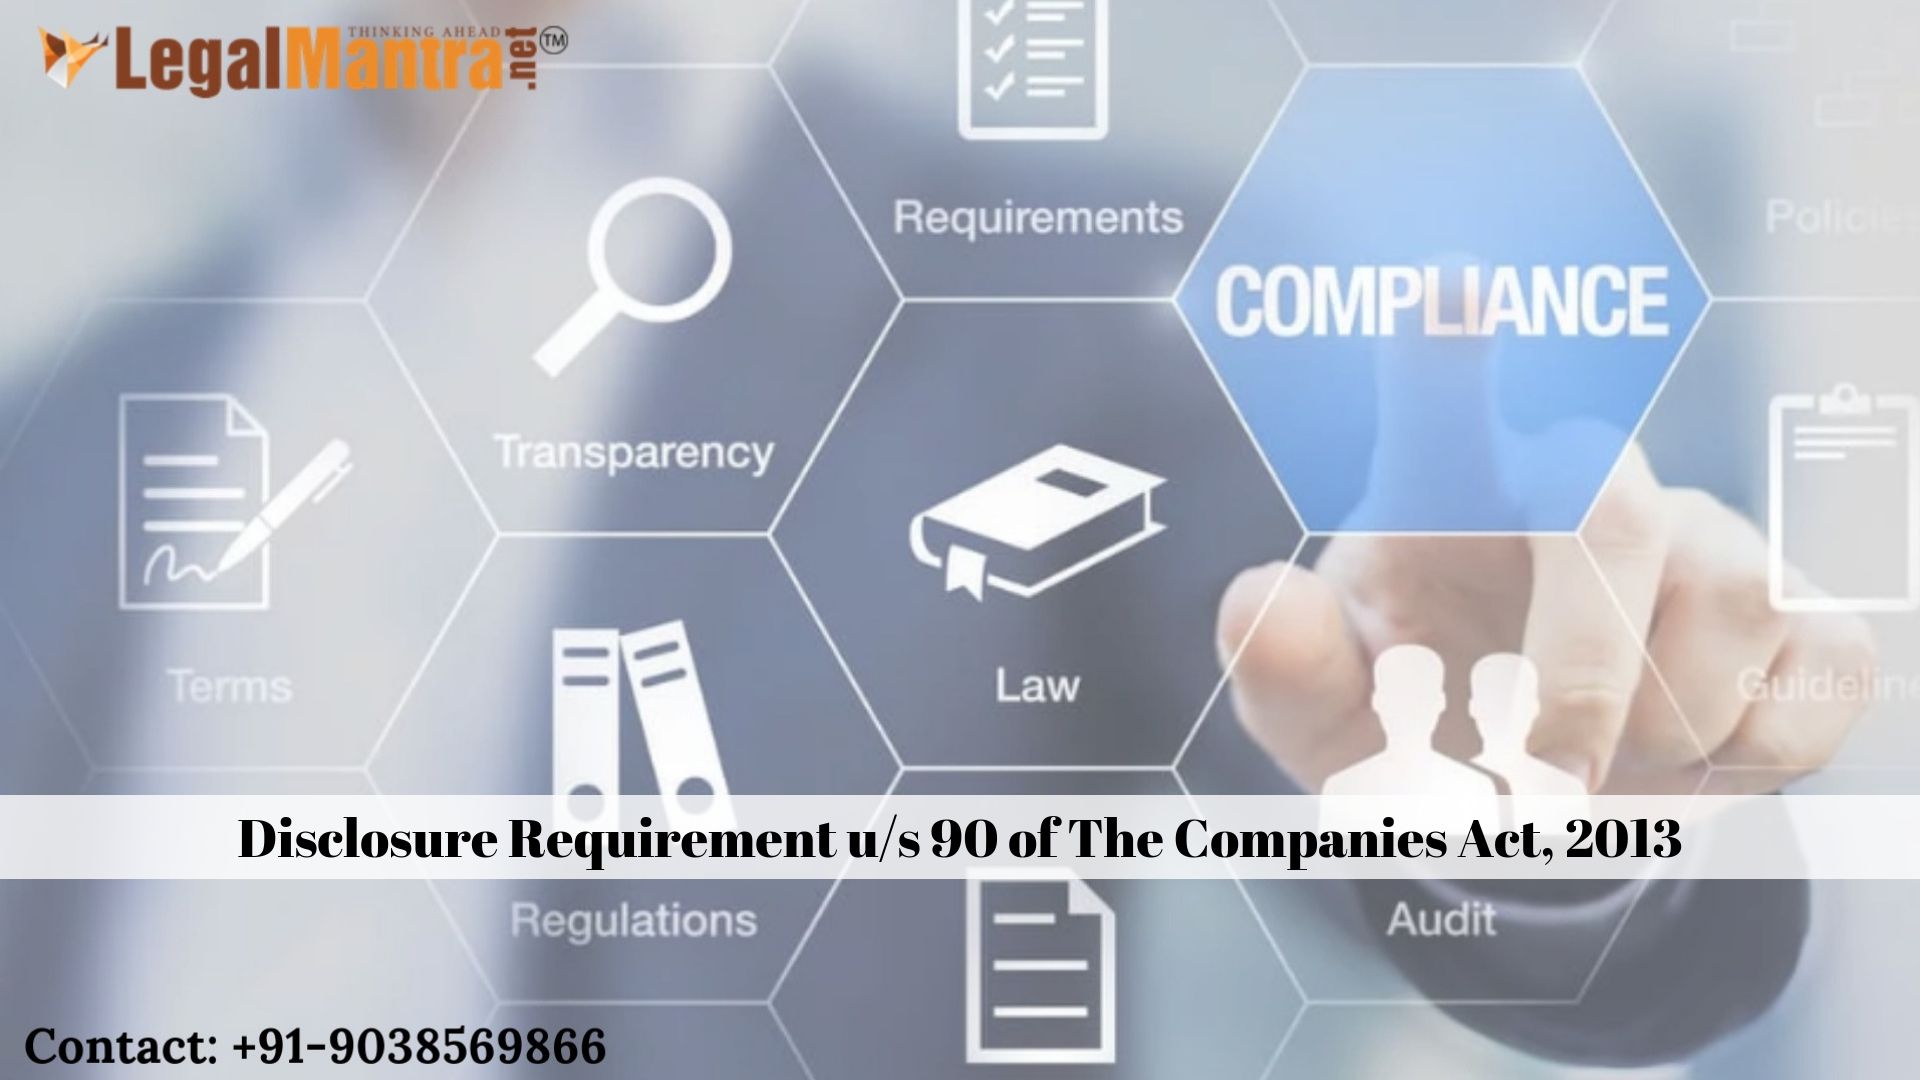 Disclosure Requirement under Amended Section 90 of The Companies Act, 2013